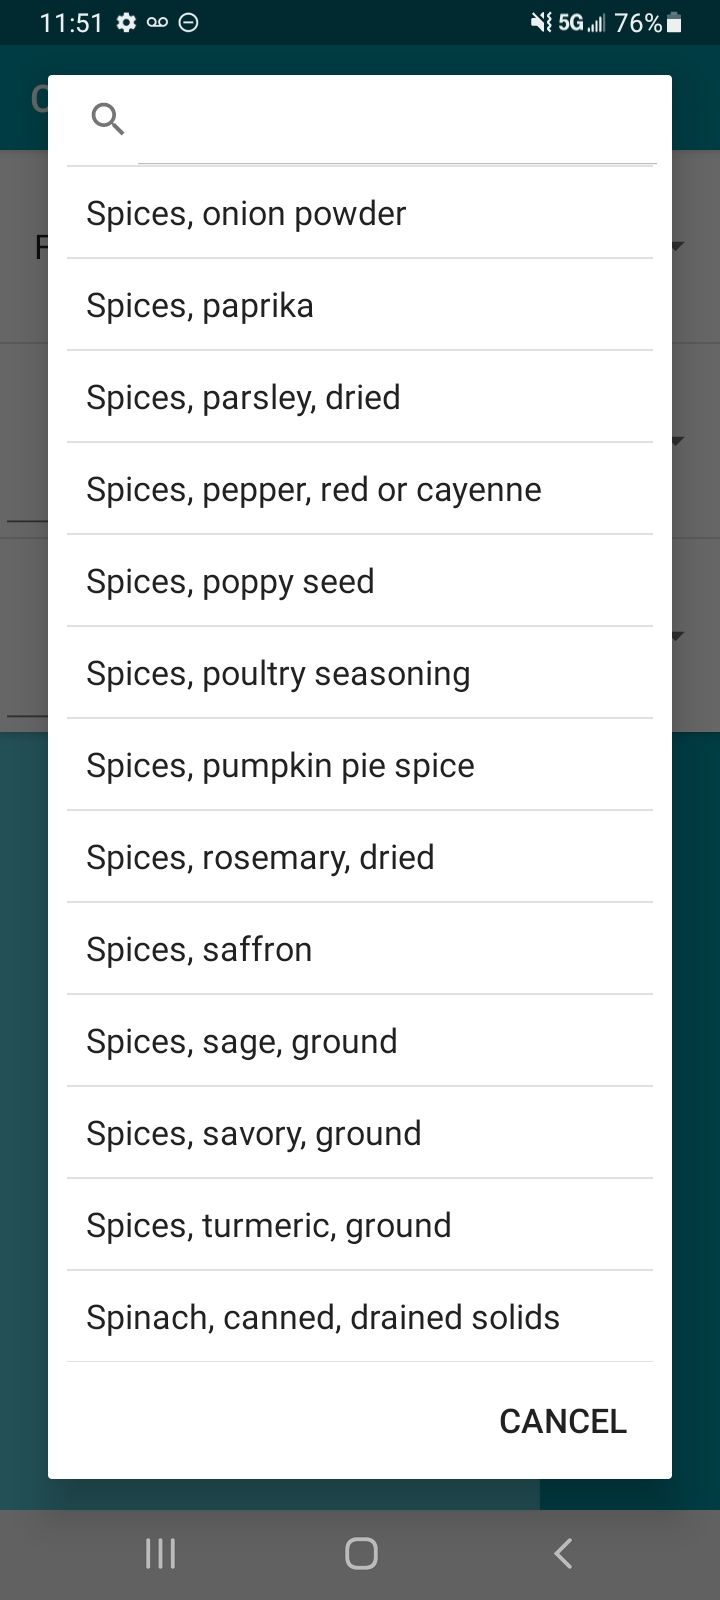 You can convert things like spices and liquid in the Cupful app, too.